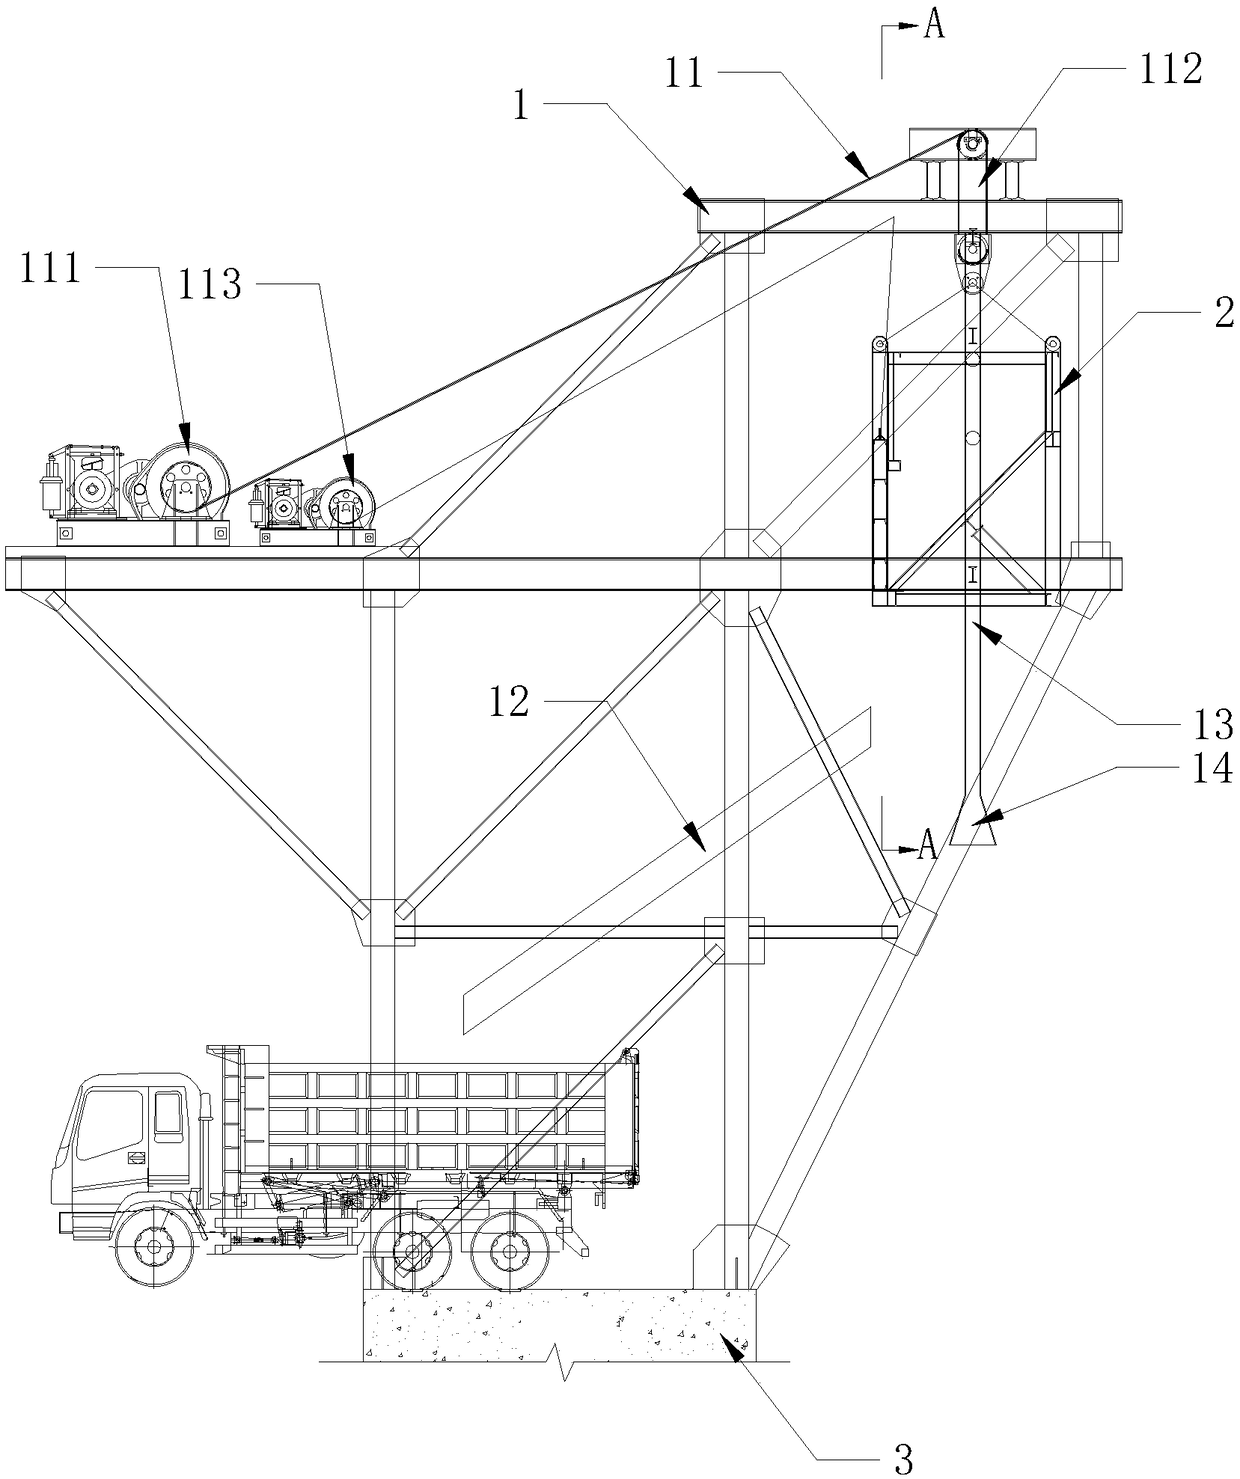 Deep foundation pit soil withdrawing equipment and construction method